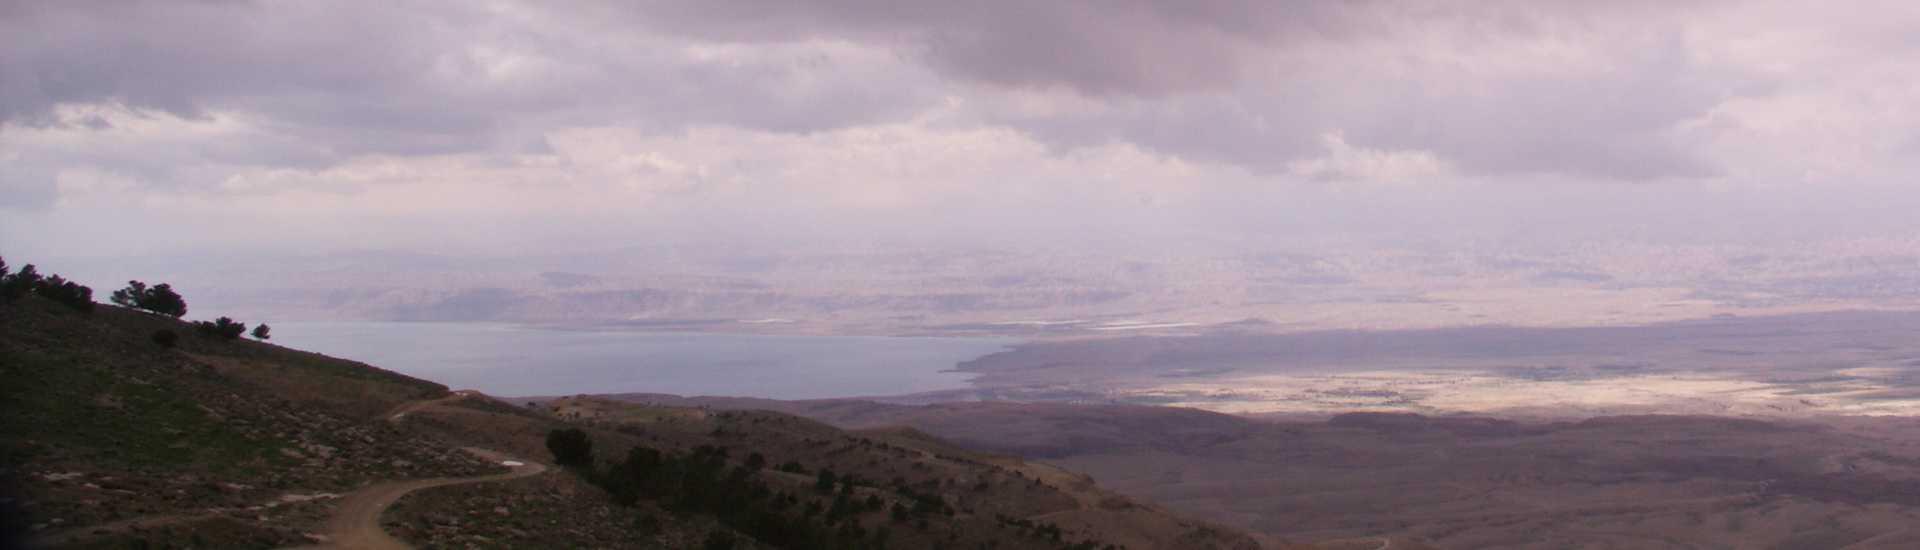 Jordan/Mt. Nebo/A new memorial on the Mount of Moses